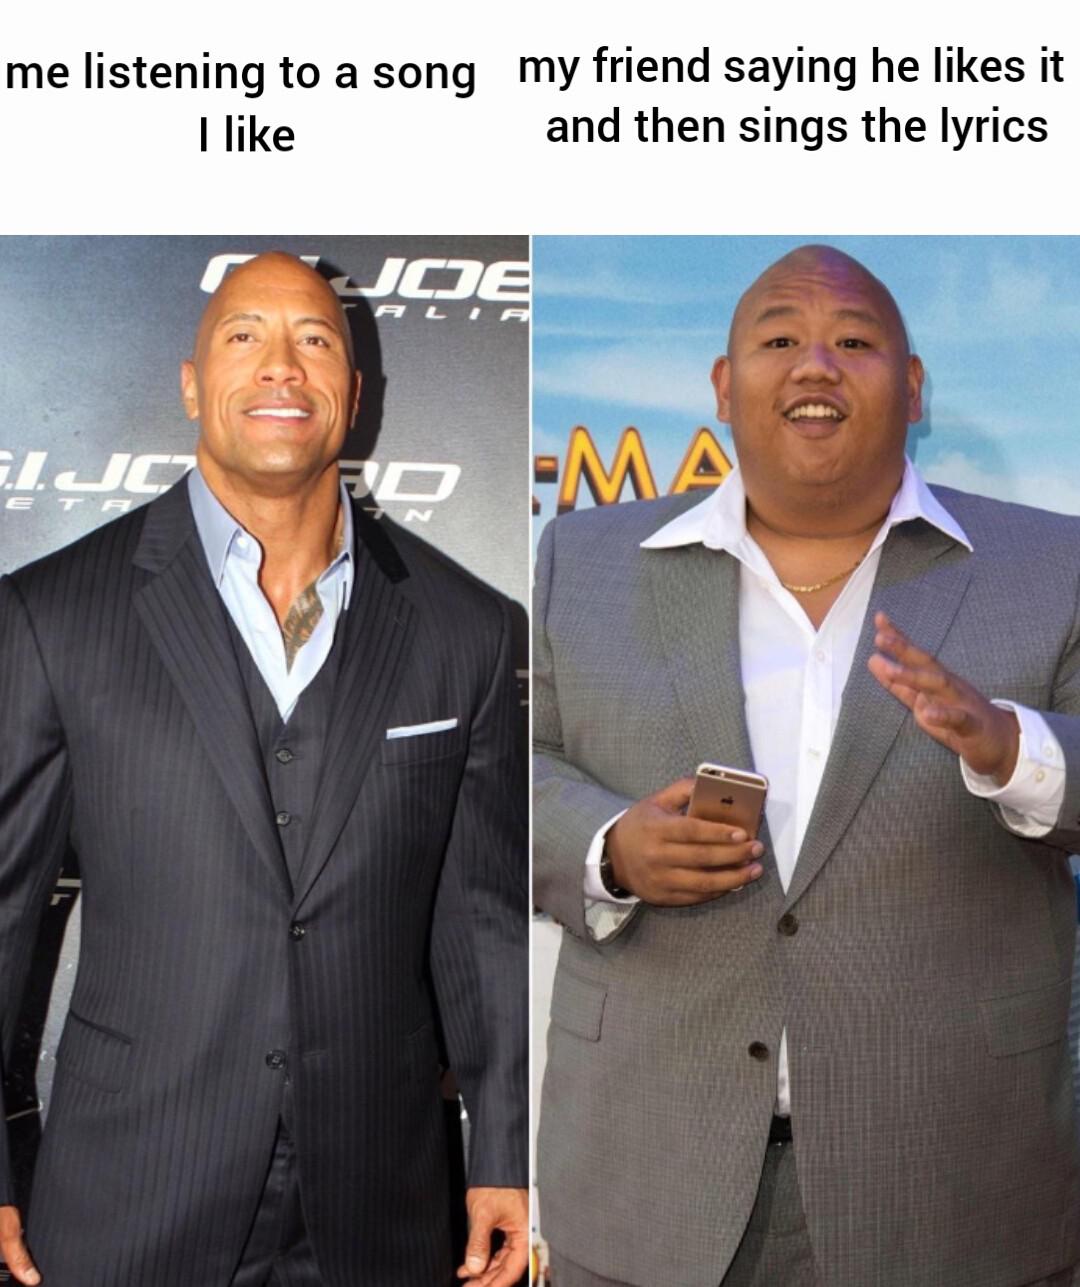 dank memes, funny memes - entrepreneur - me listening to a song my friend saying he it I and then sings the lyrics Joje A La 1. Jc Ema E T N